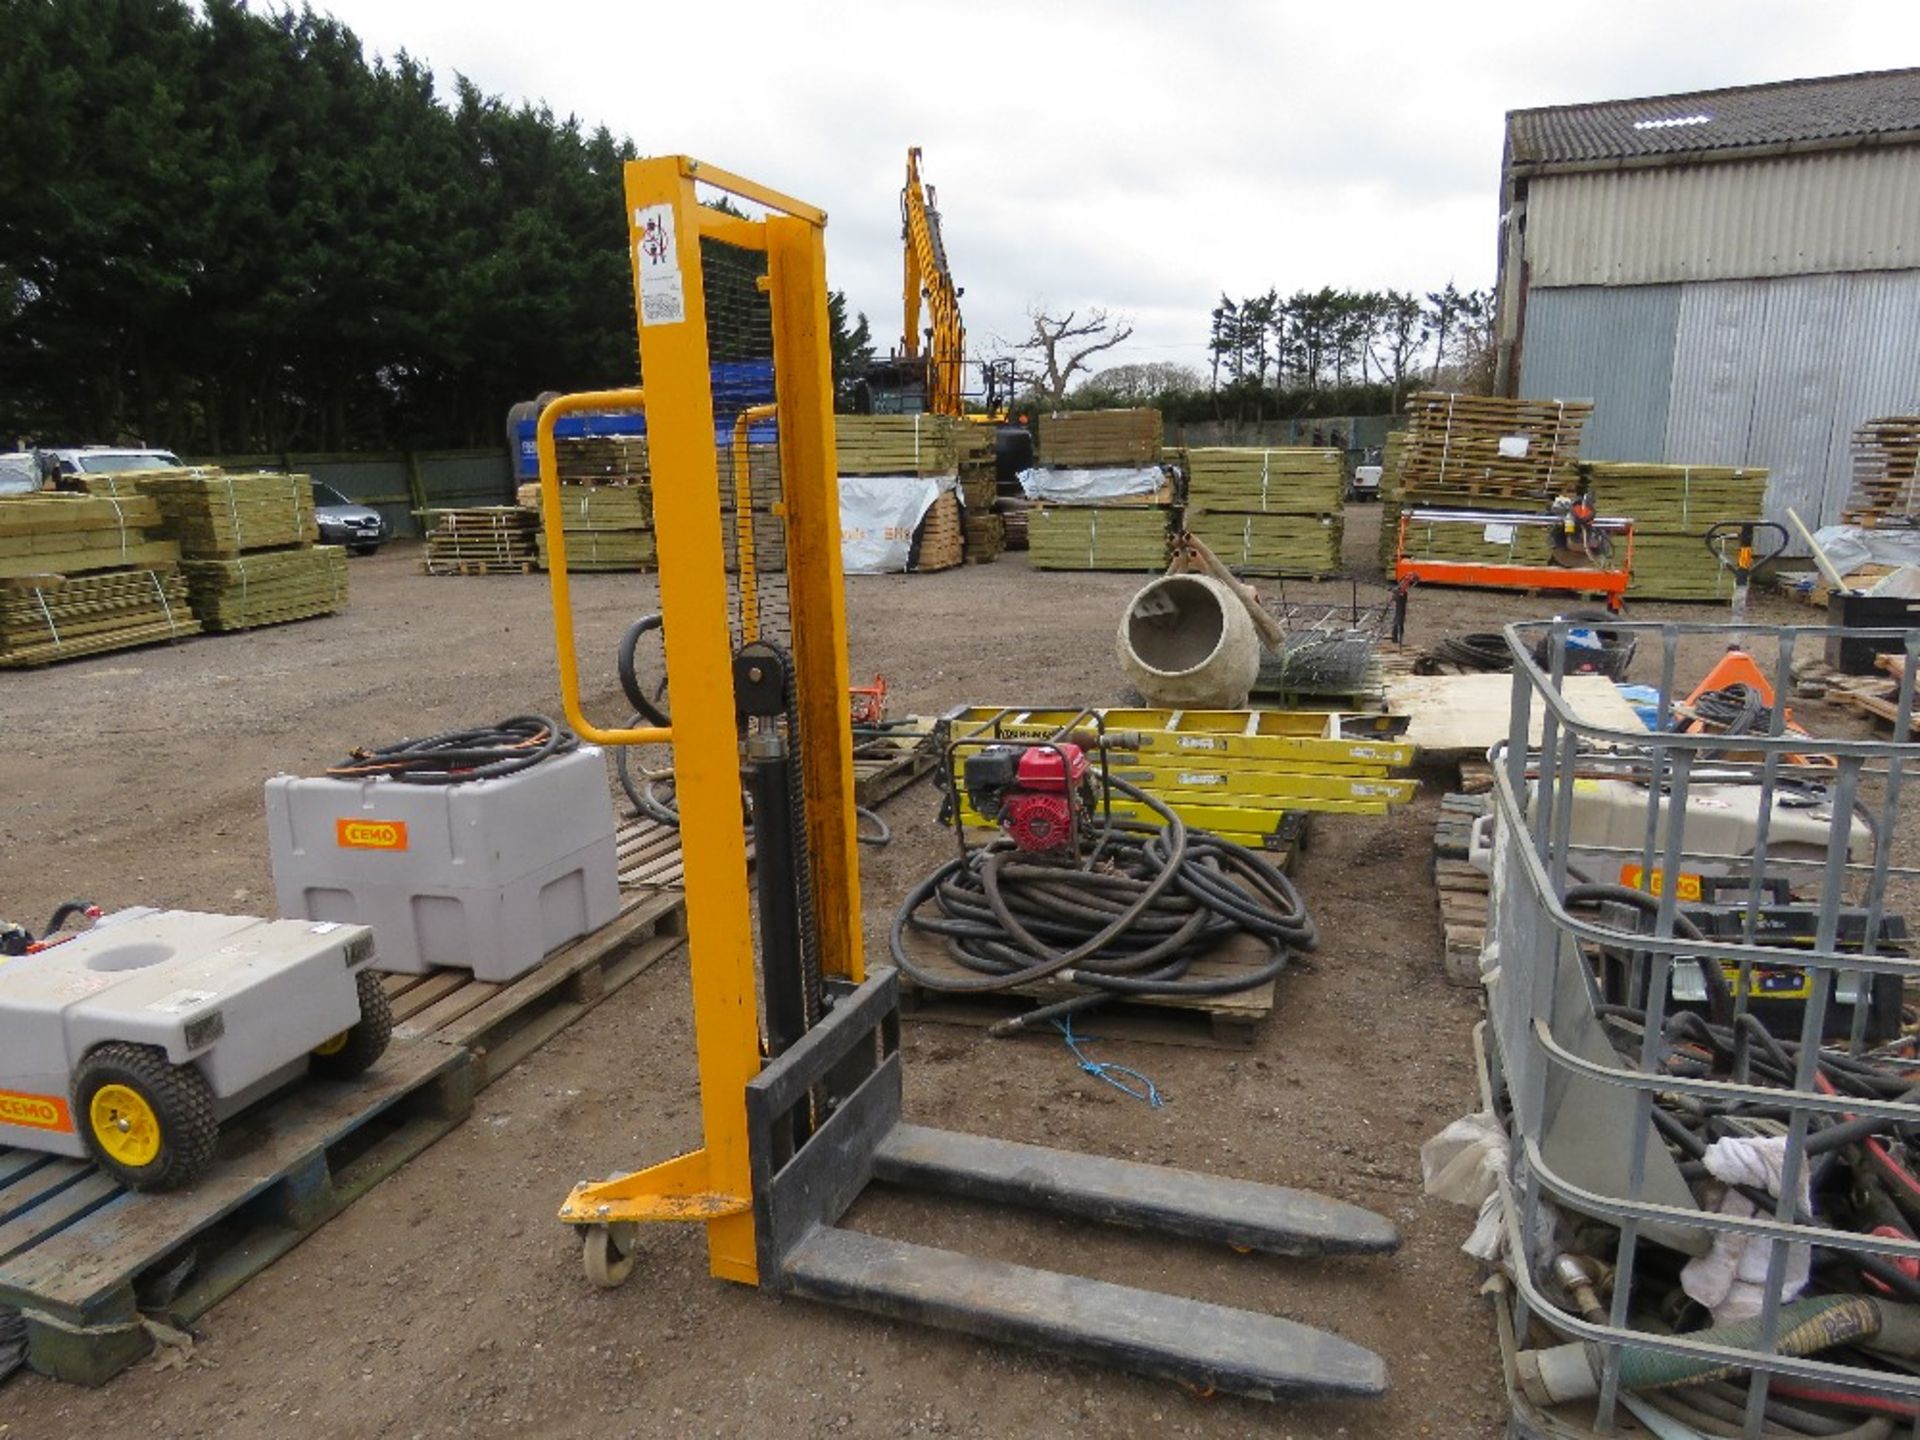 HAND STACKER MANUAL OPERTAED FORKLIFT TRUCK, 1 TONNE MAXIMUM CAPACITY. SOURCED FROM COMPANY LIQUIDA